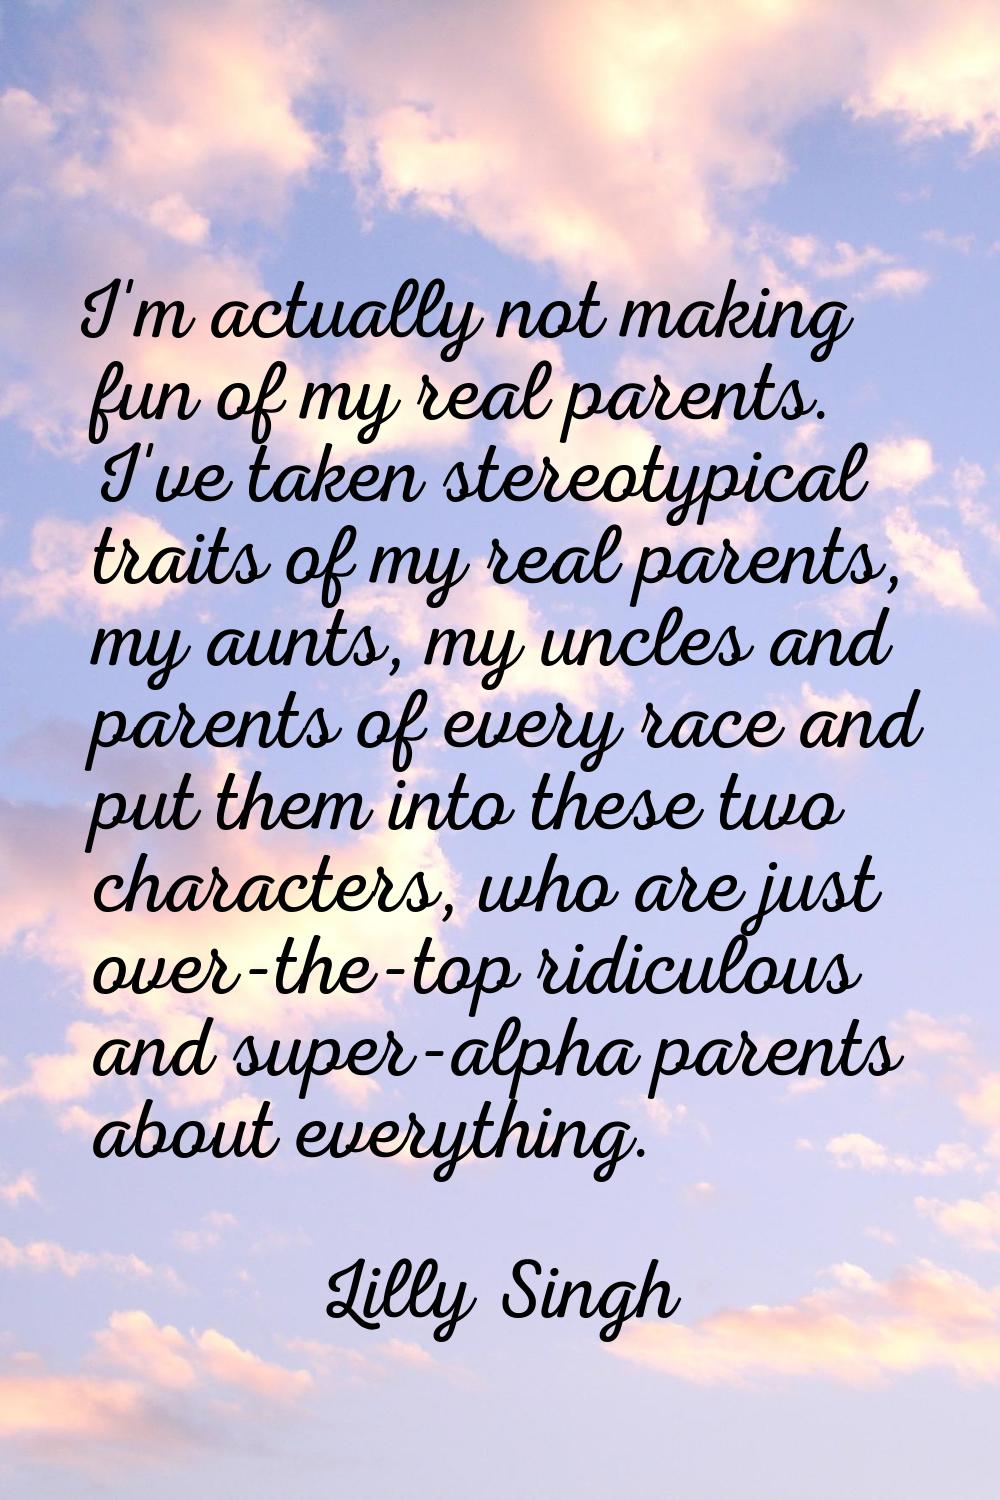 I'm actually not making fun of my real parents. I've taken stereotypical traits of my real parents,